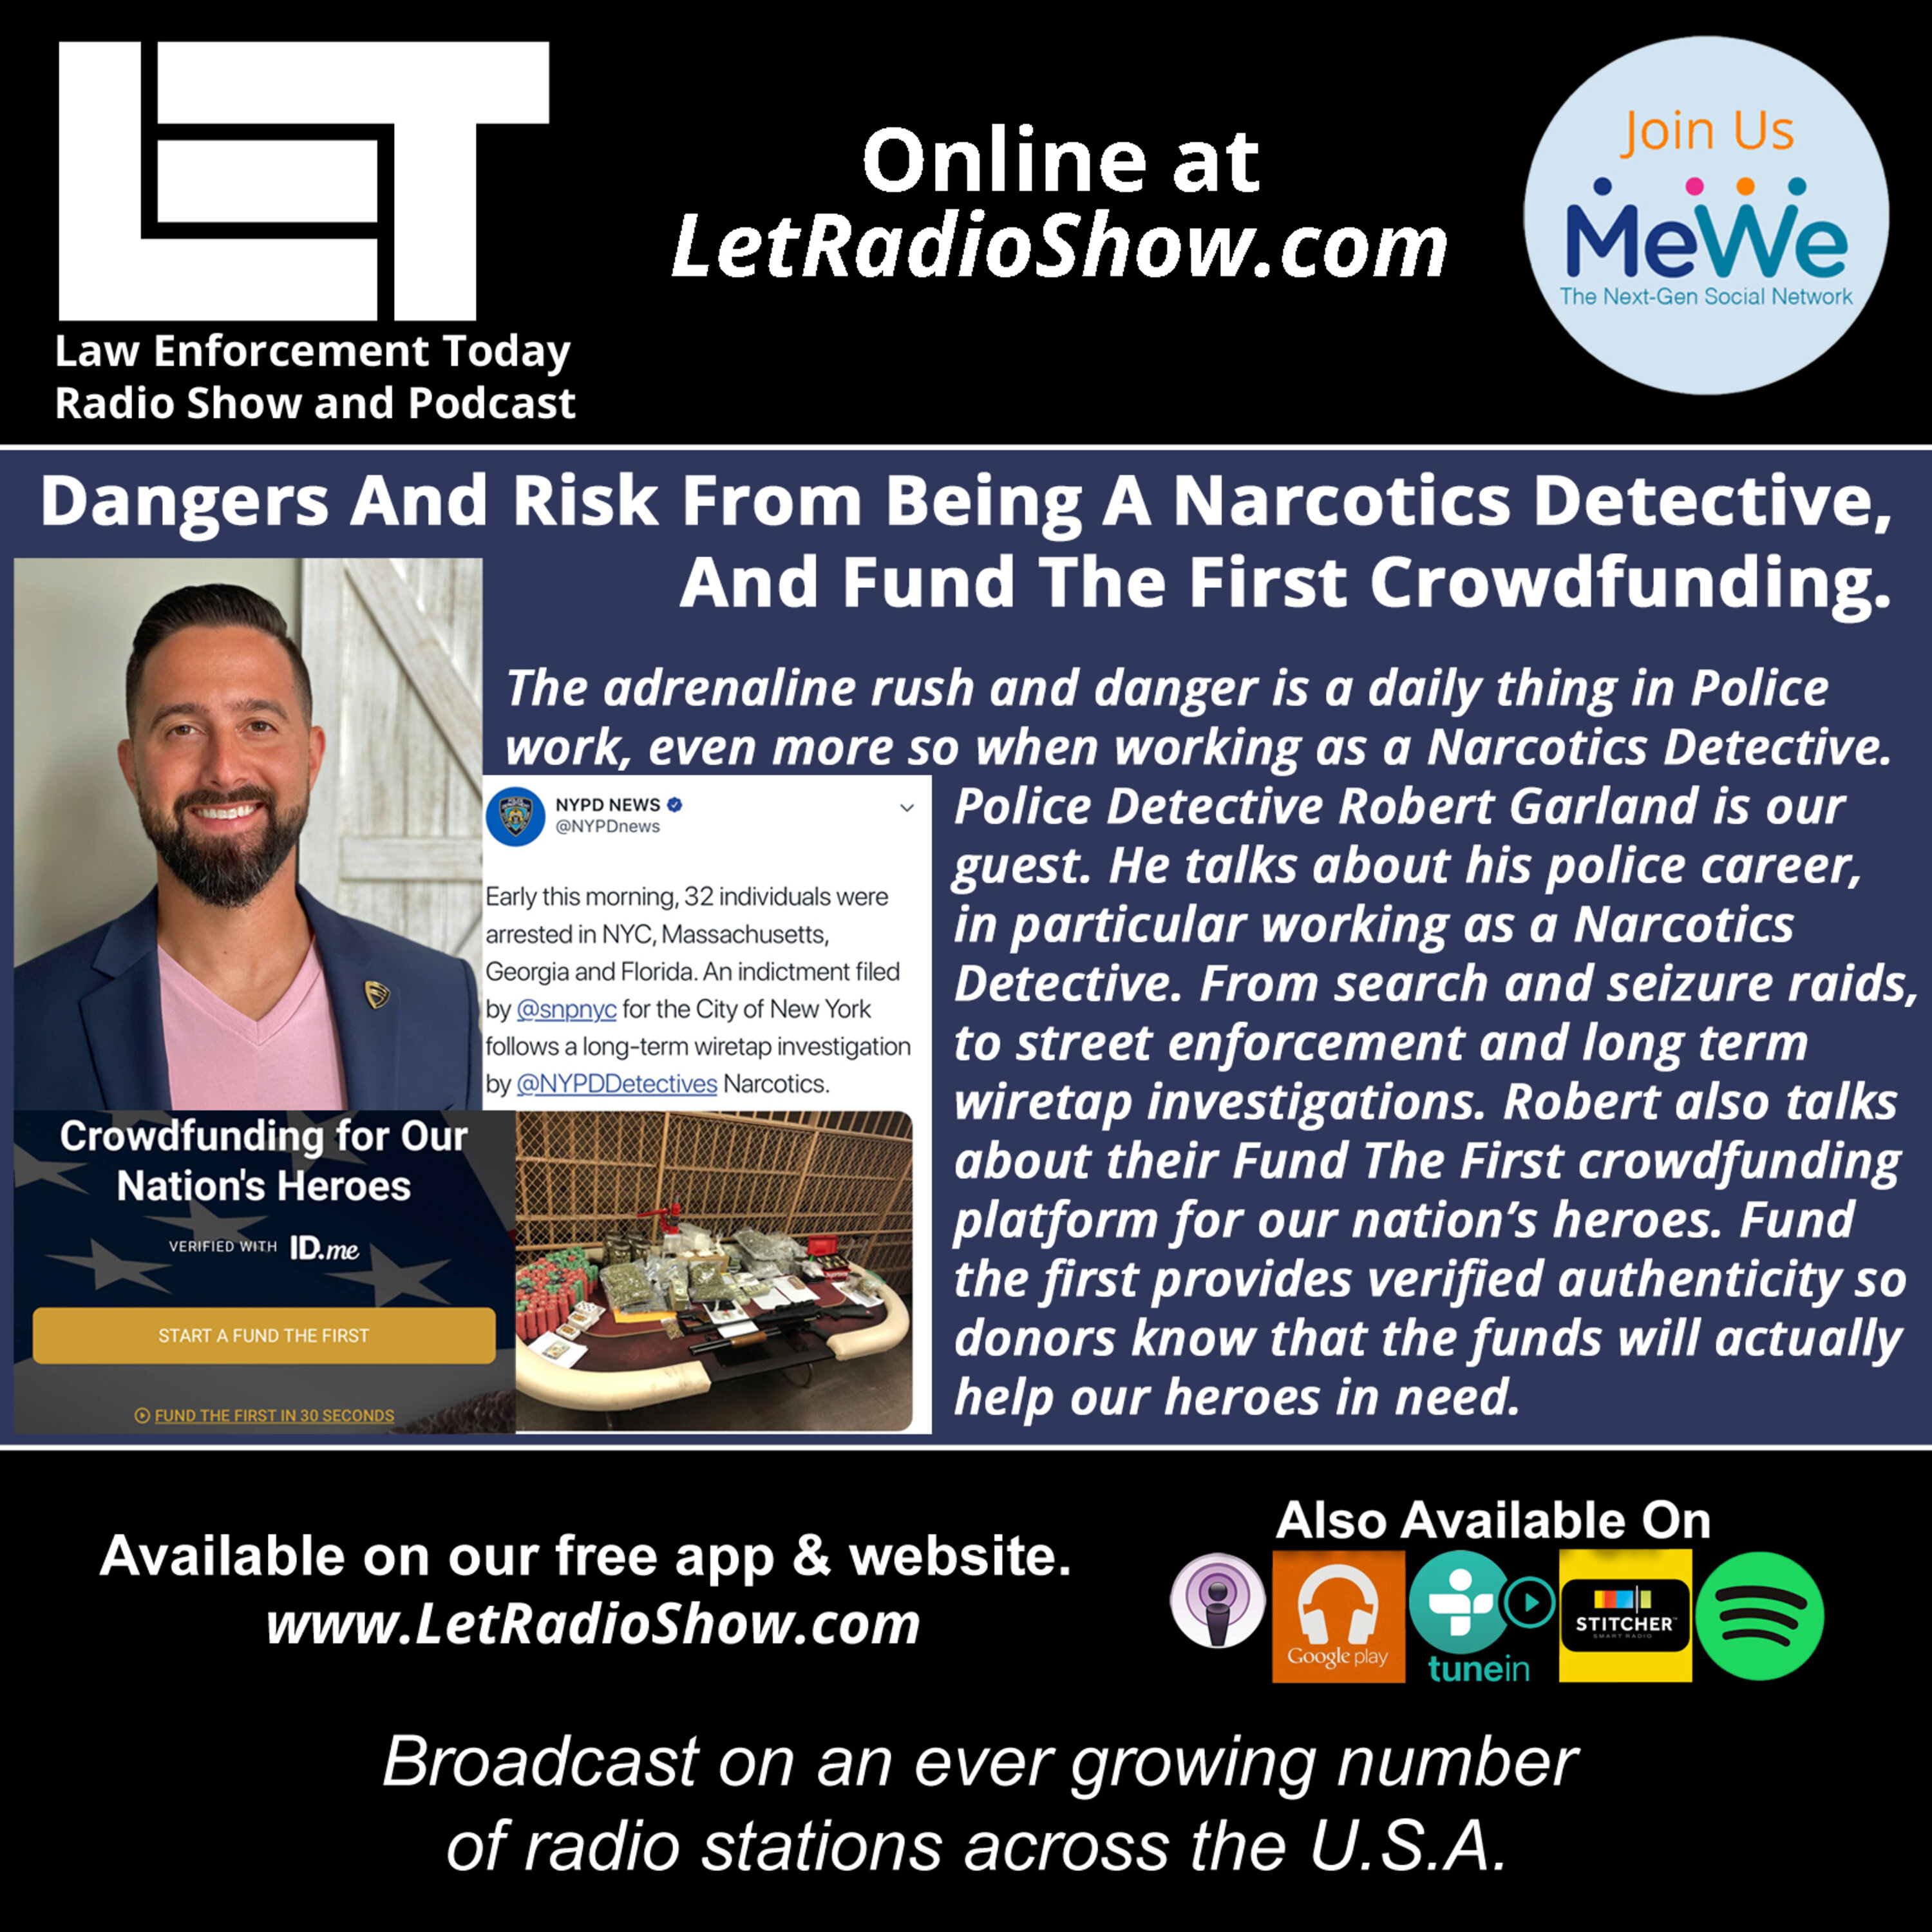 S5E21: The Dangers And Risk From Being A Narcotics Detective,  And Fund The First Crowdfunding.